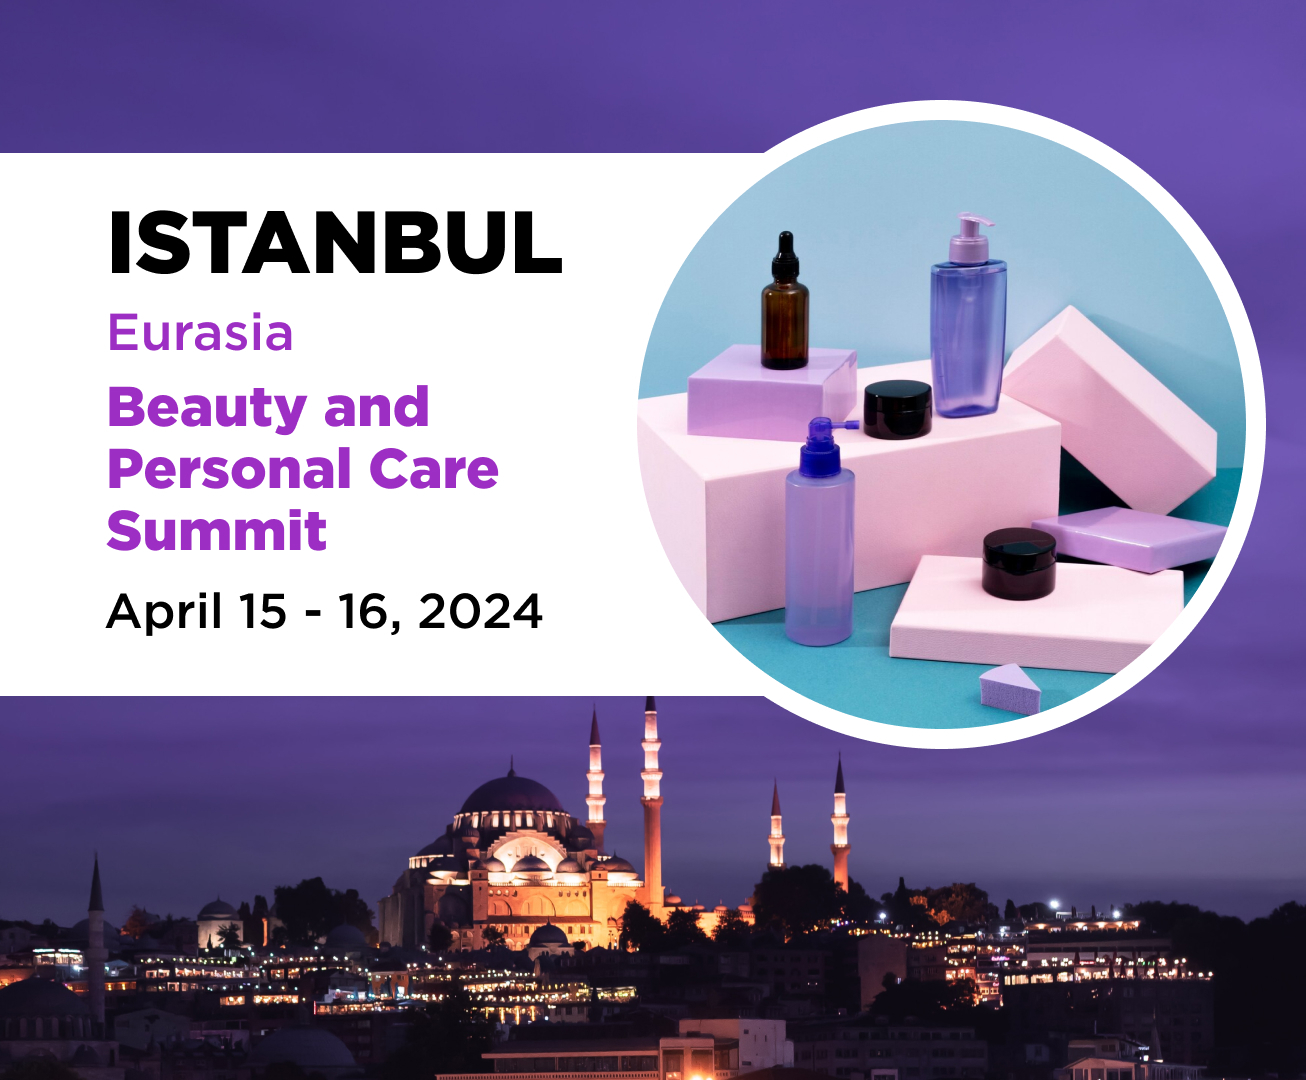 EURASIA BEAUTY AND PERSONAL CARE SUMMIT